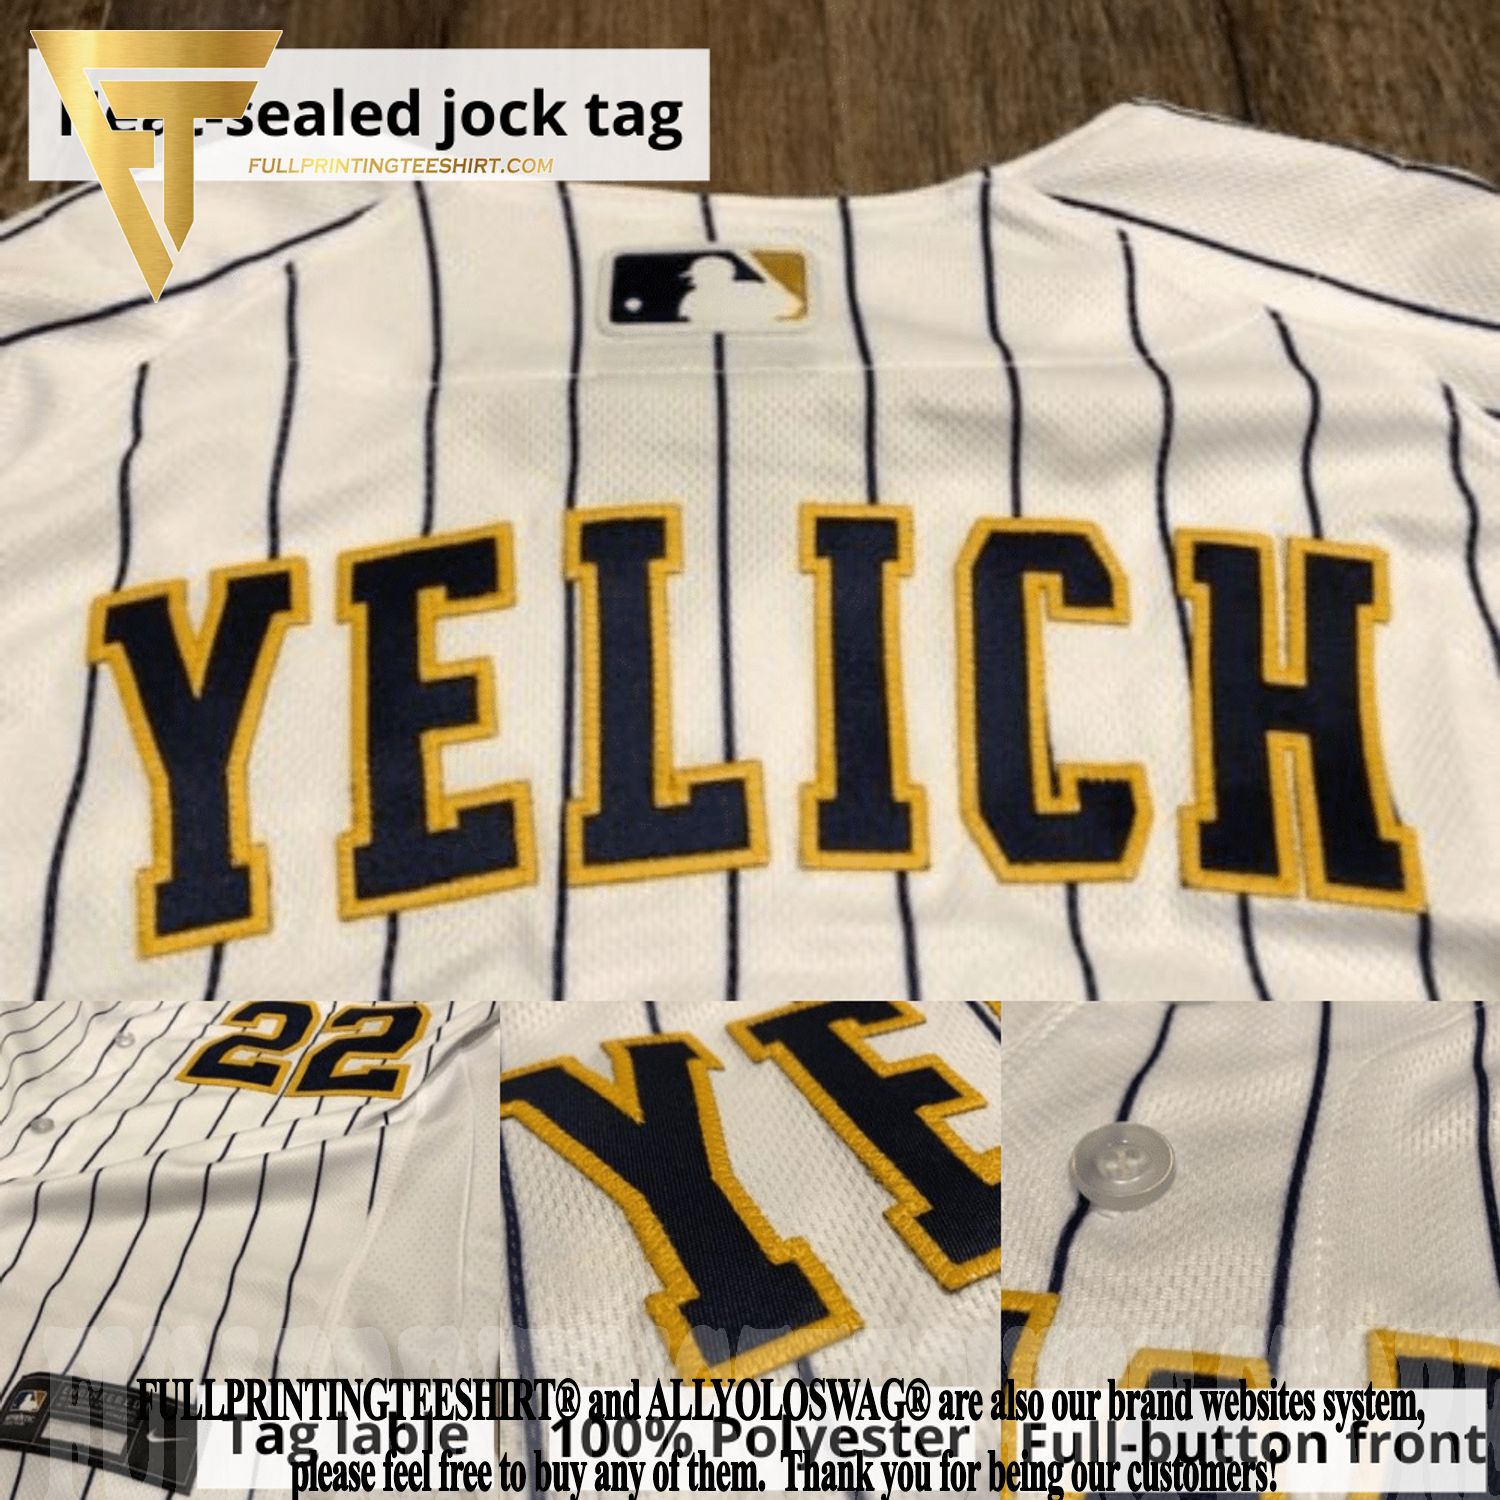 angels city connect jersey ohtani